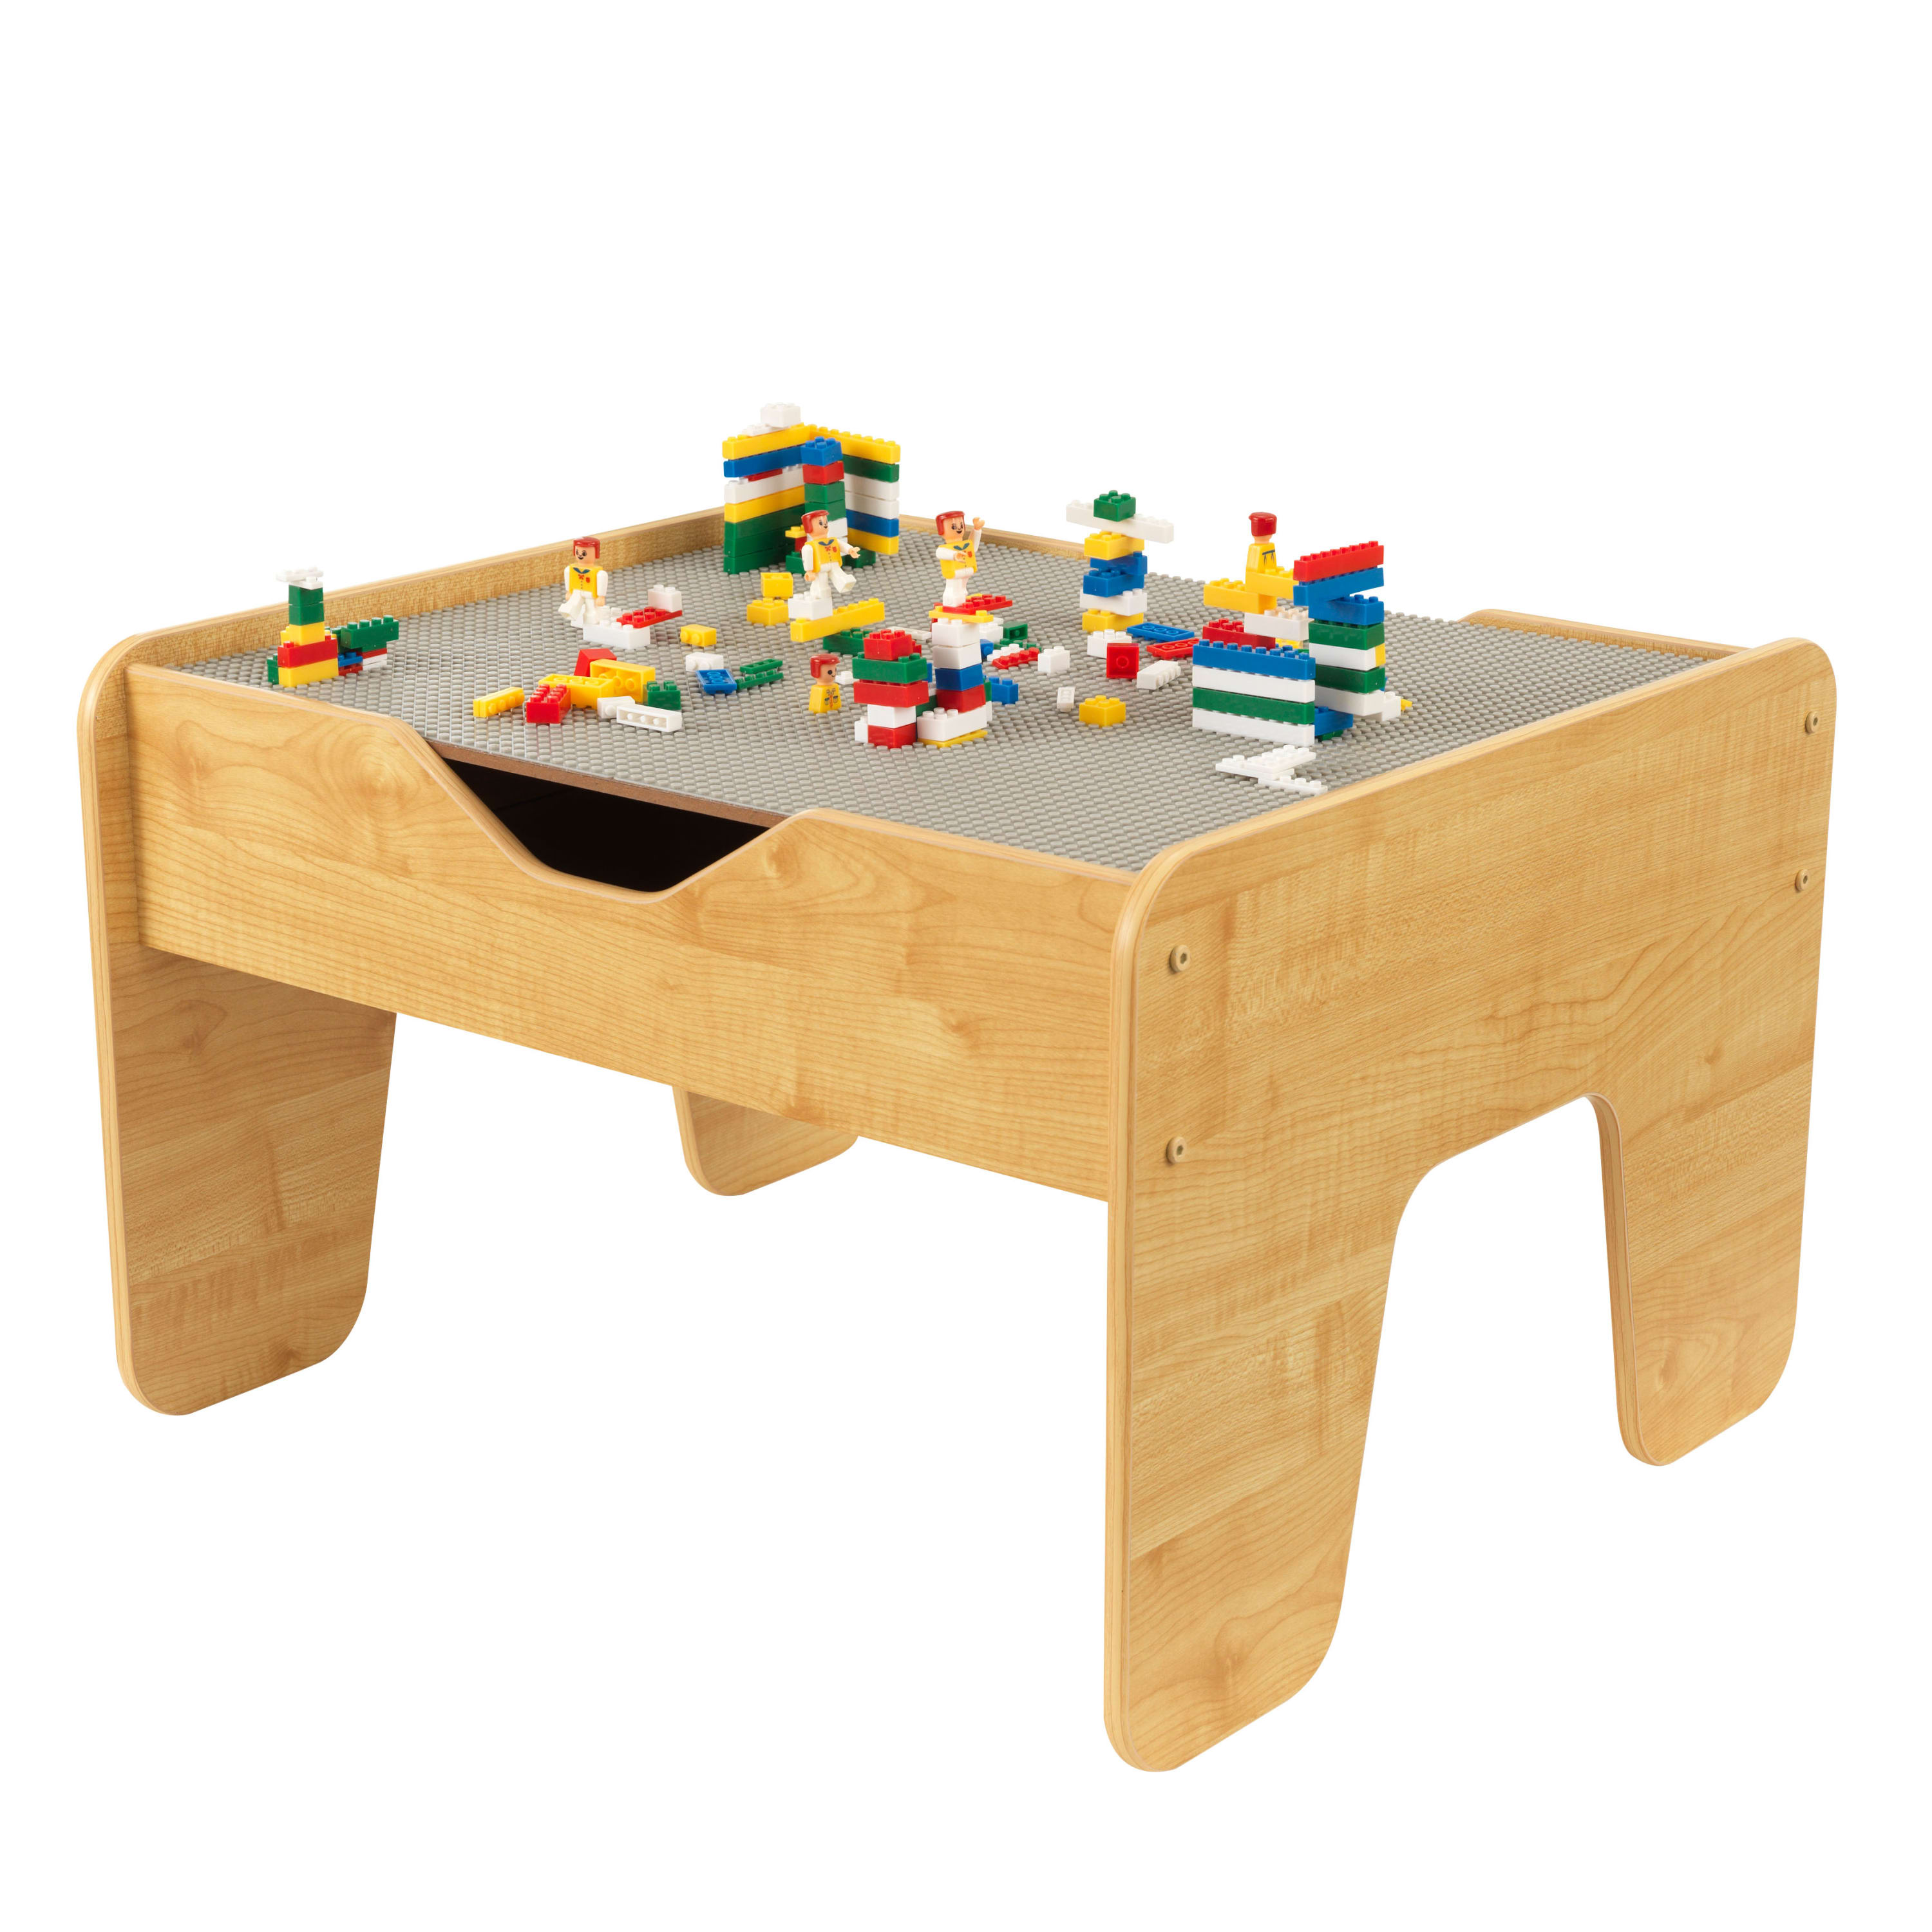 KidKraft Reversible Wooden Activity Table with 195 Building Bricks – Gray & Natural, For Ages 3+ - image 1 of 10